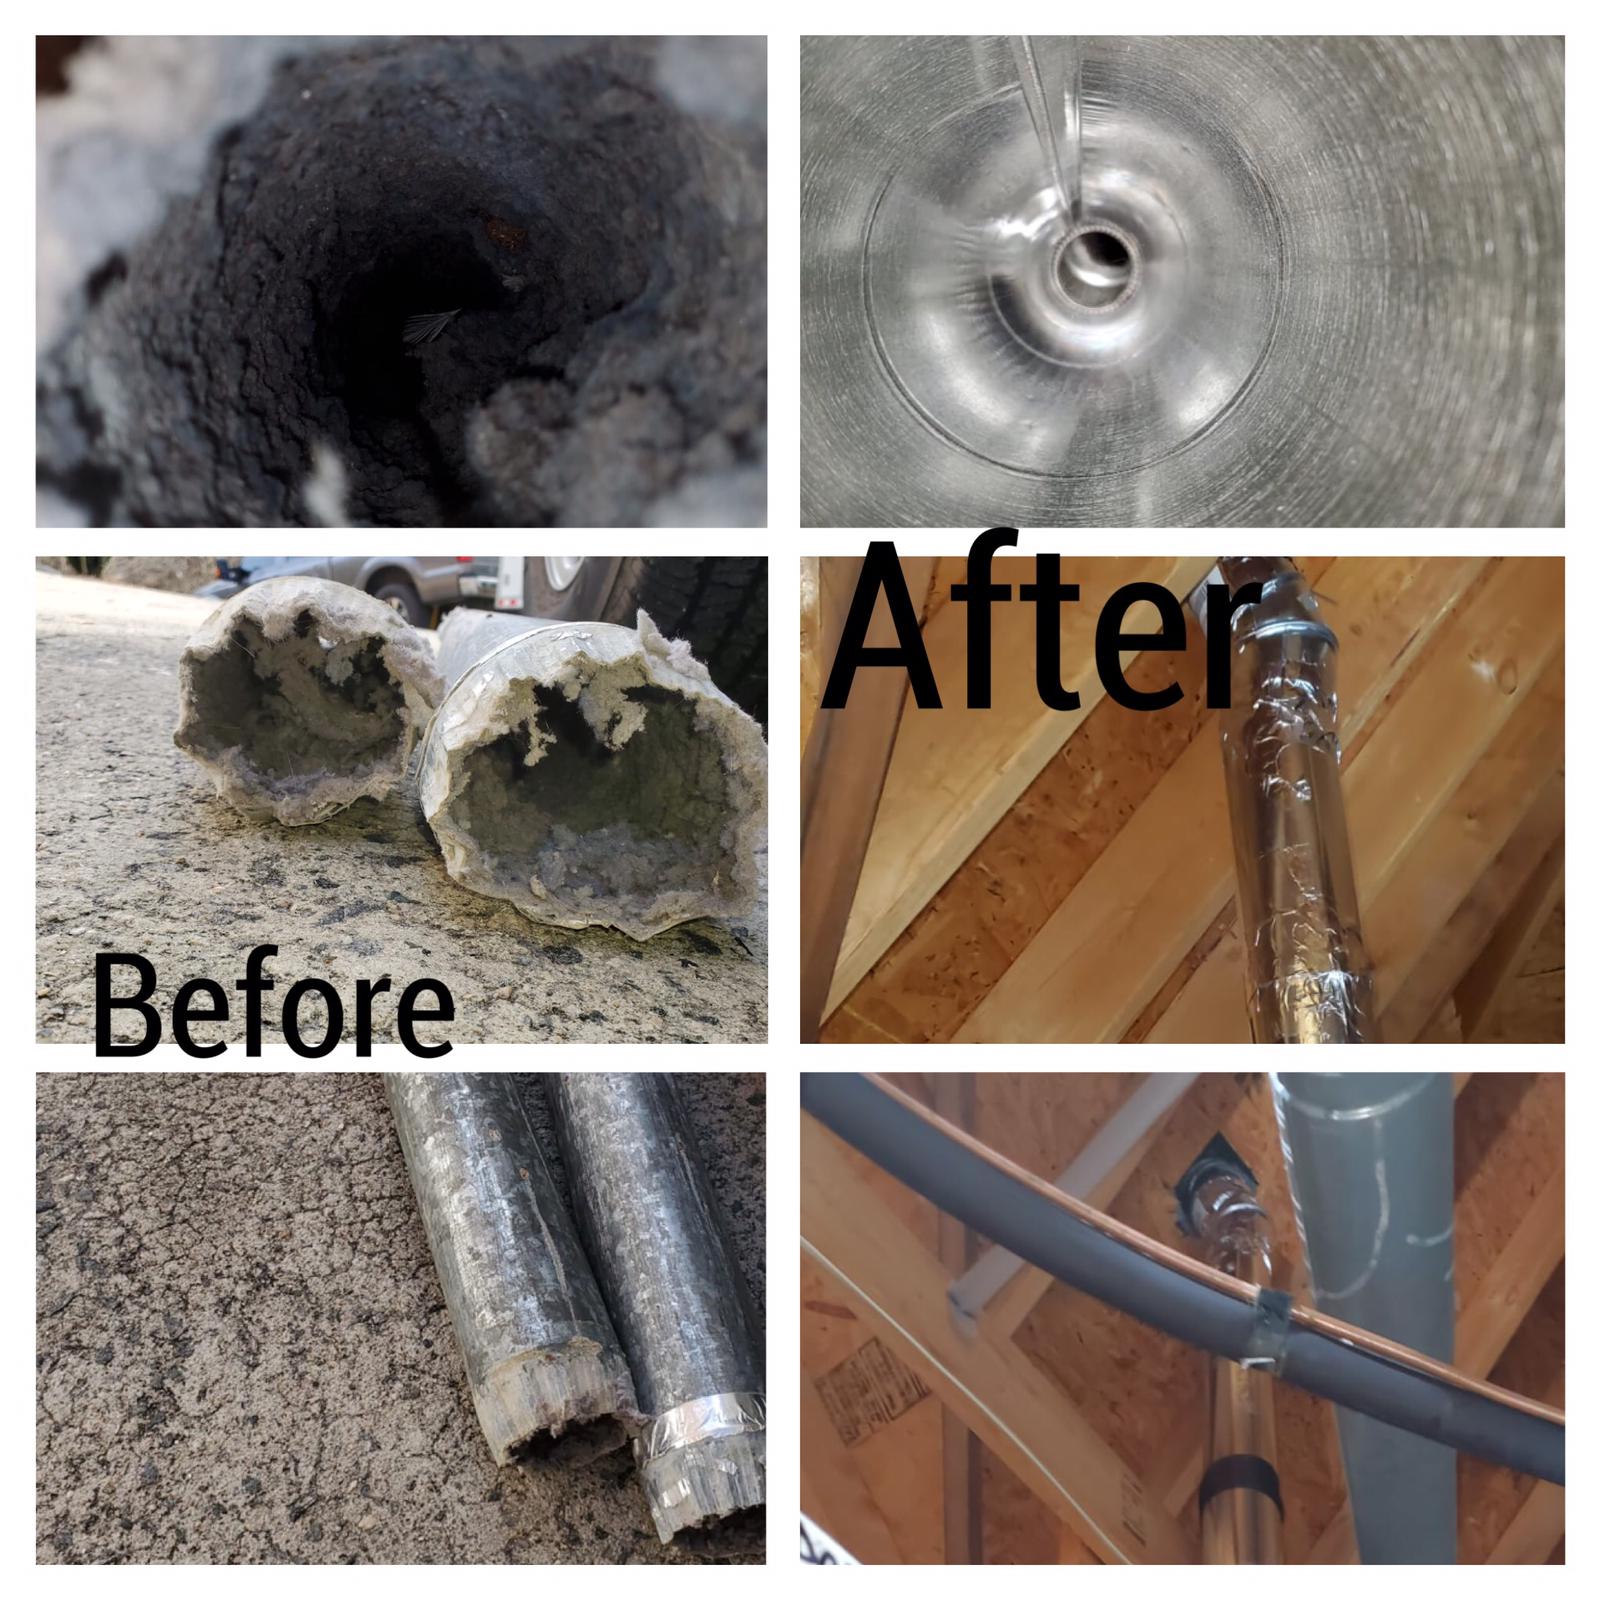 Dryer Vent Cleaning​ - After and before